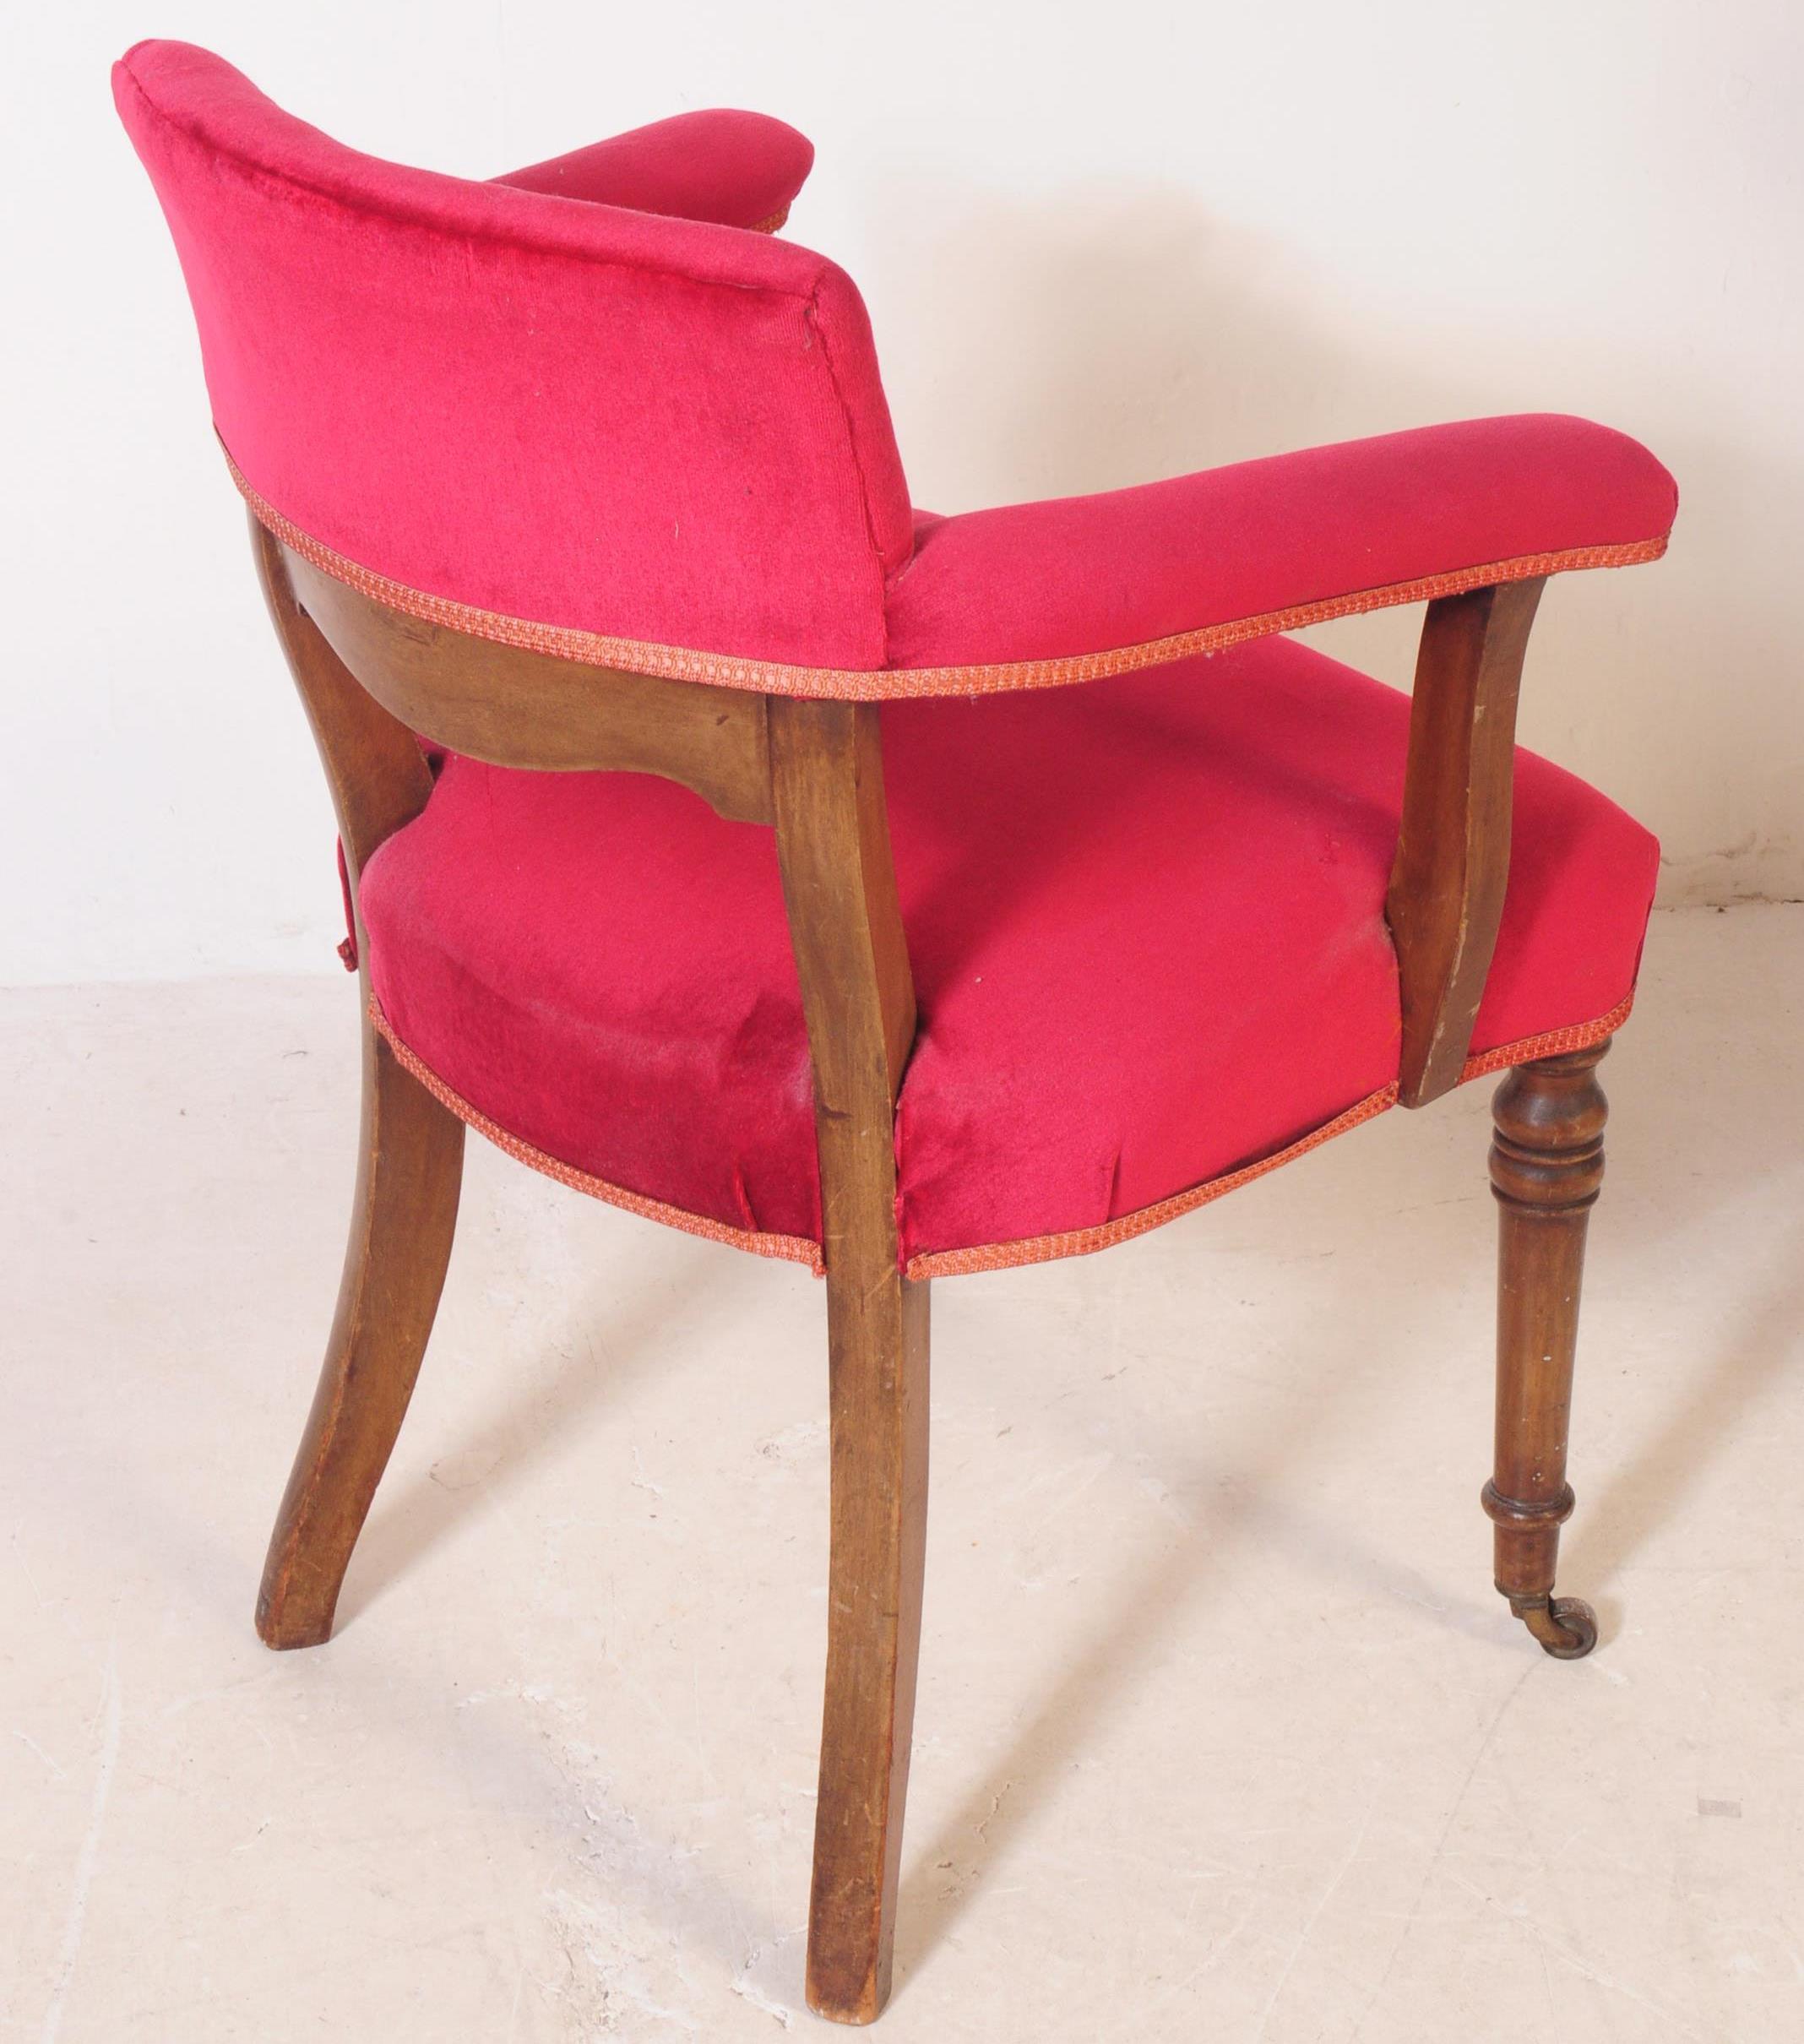 19TH CENTURY VICTORIAN UPHOLSTERED EASY ARMCHAIR - Image 5 of 8